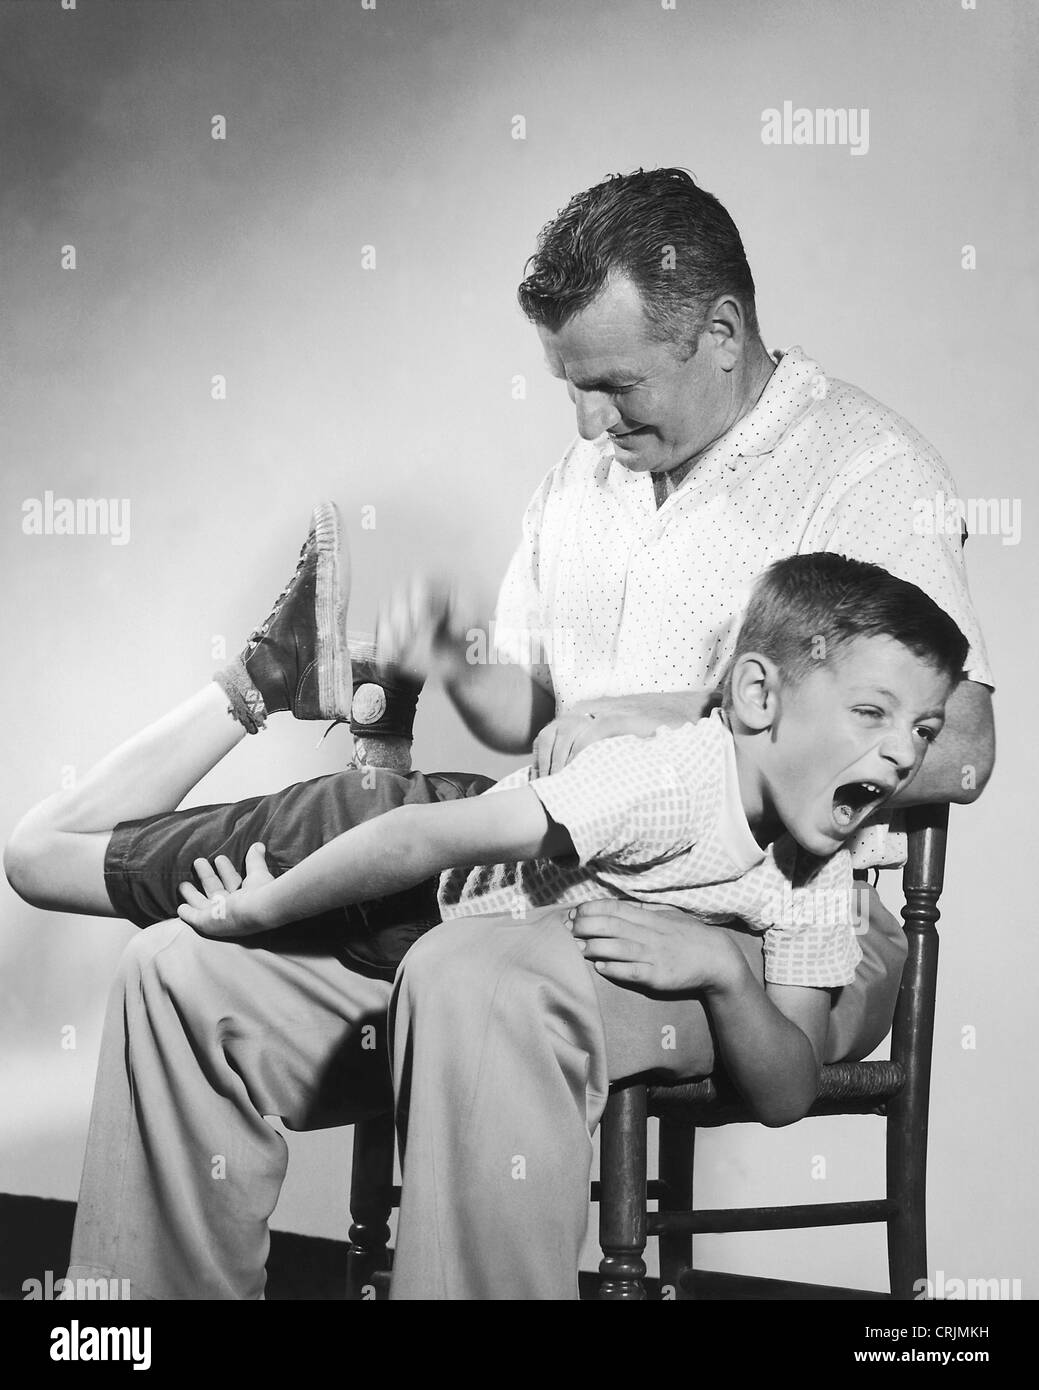 Daddy spankings